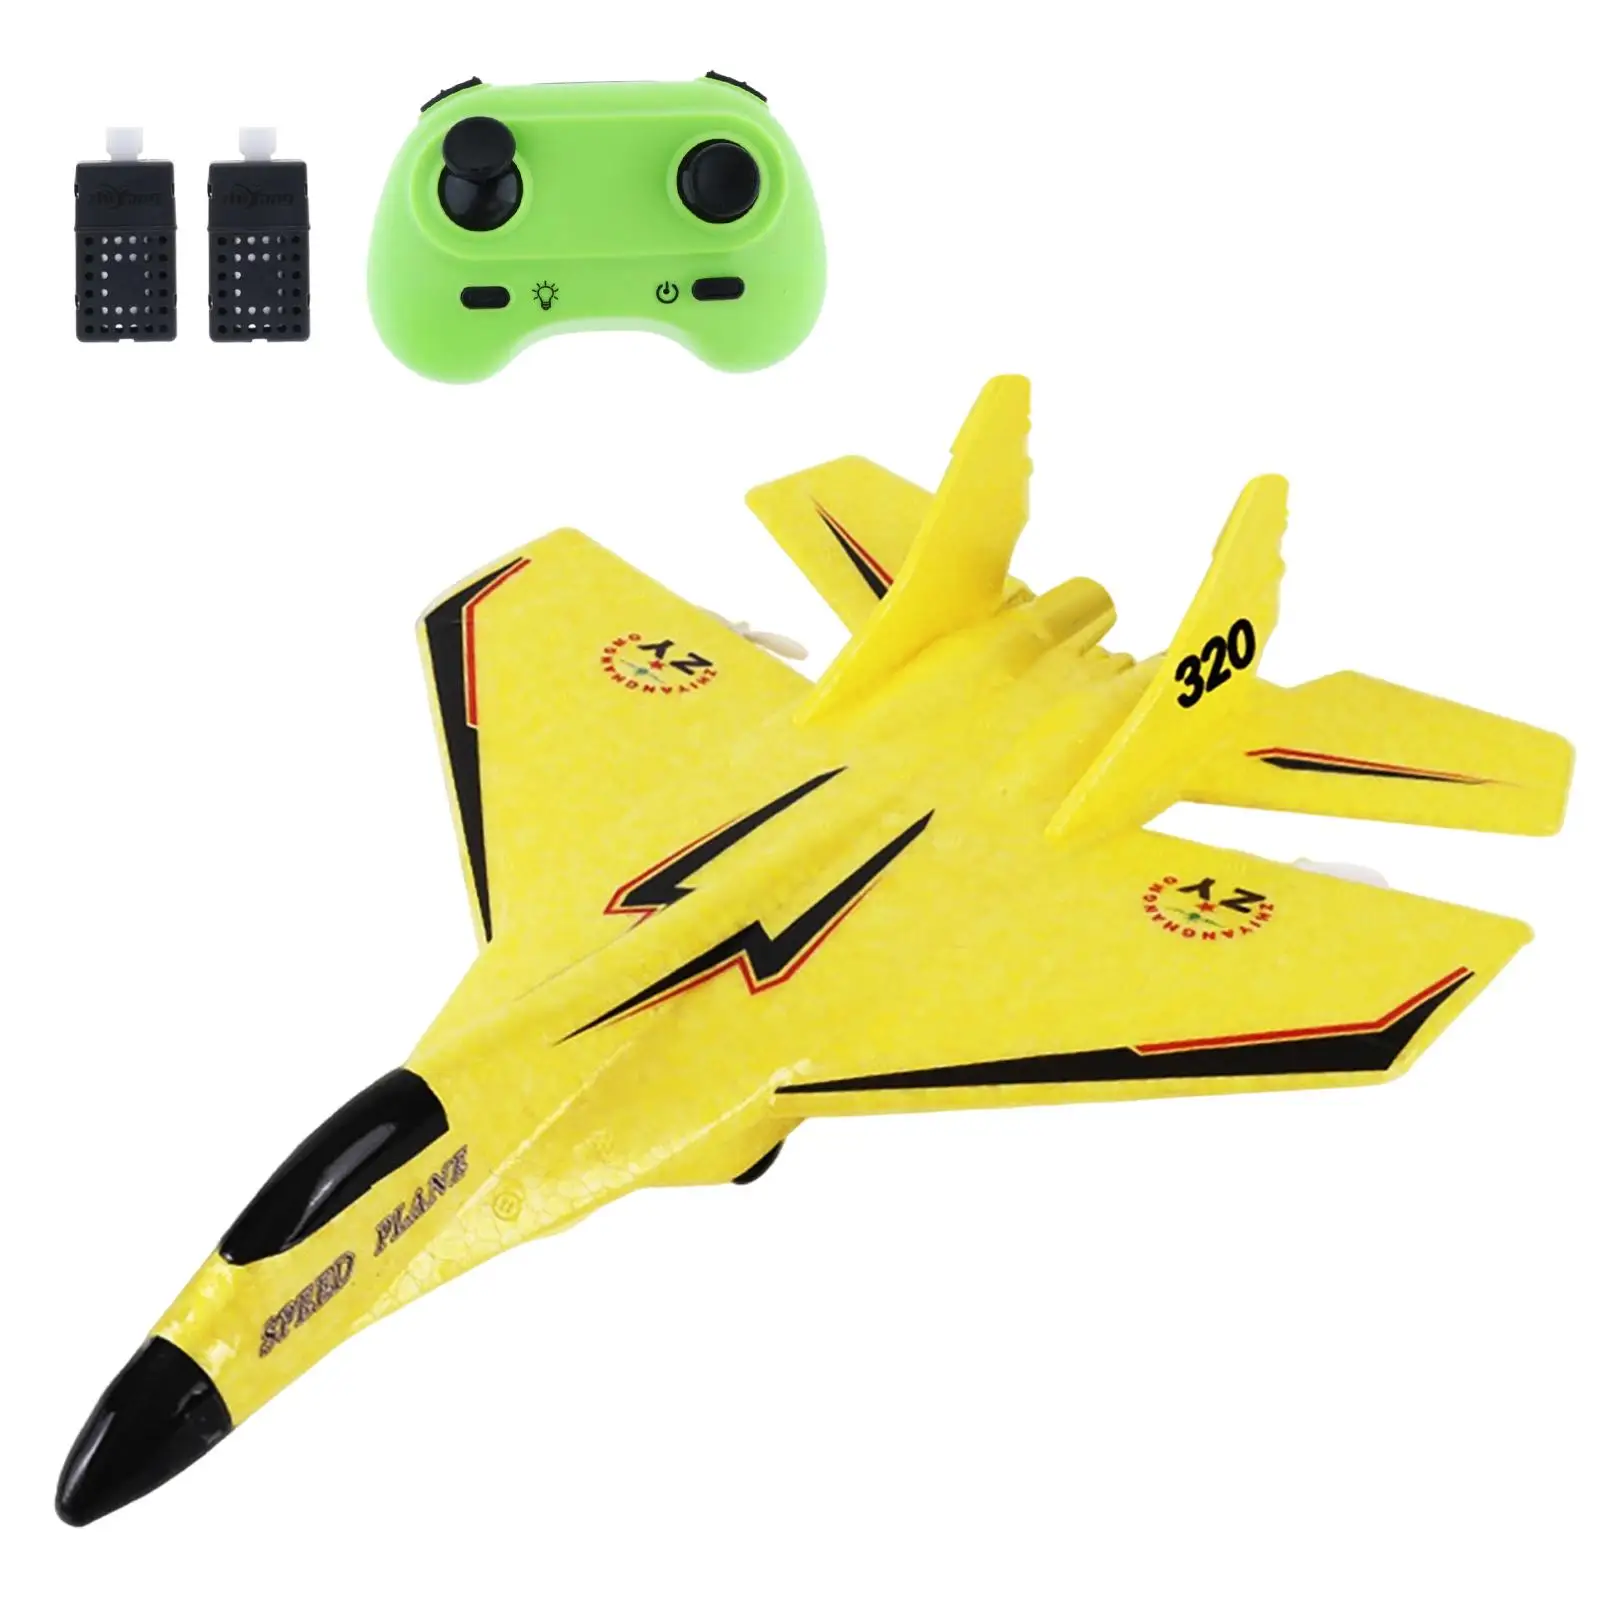 2 CH RC Plane Gift 2.4G Easy to Control RC Glider Foam RC Airplane Remote Control Airplane for Adults Kids Beginner Boys Girls